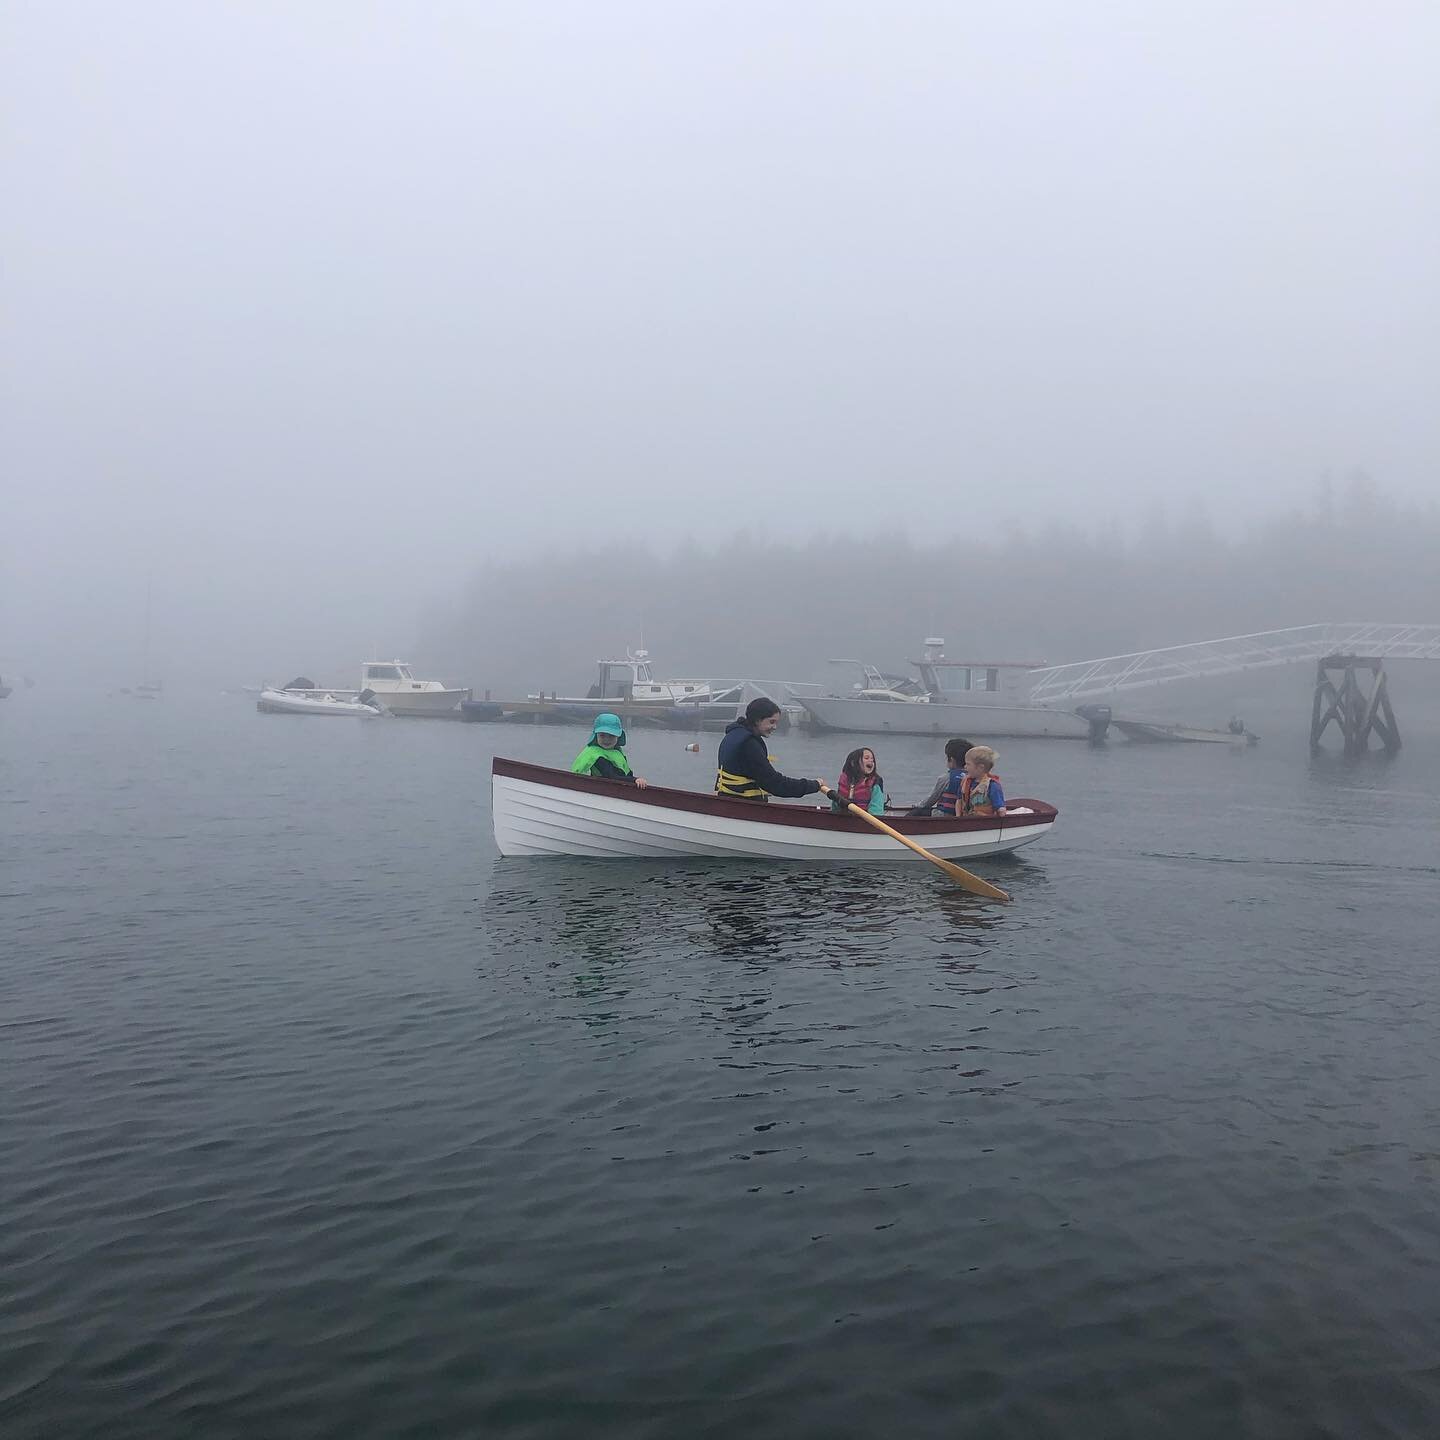 Week 4 wrap up! This week we went on many foggy day adventures, rescued a butterfly from the boathouse, built driftwood fish, started our version of Capture the Flag, and wrapped up the week with some nice sailing weather (finally!) #seasalts